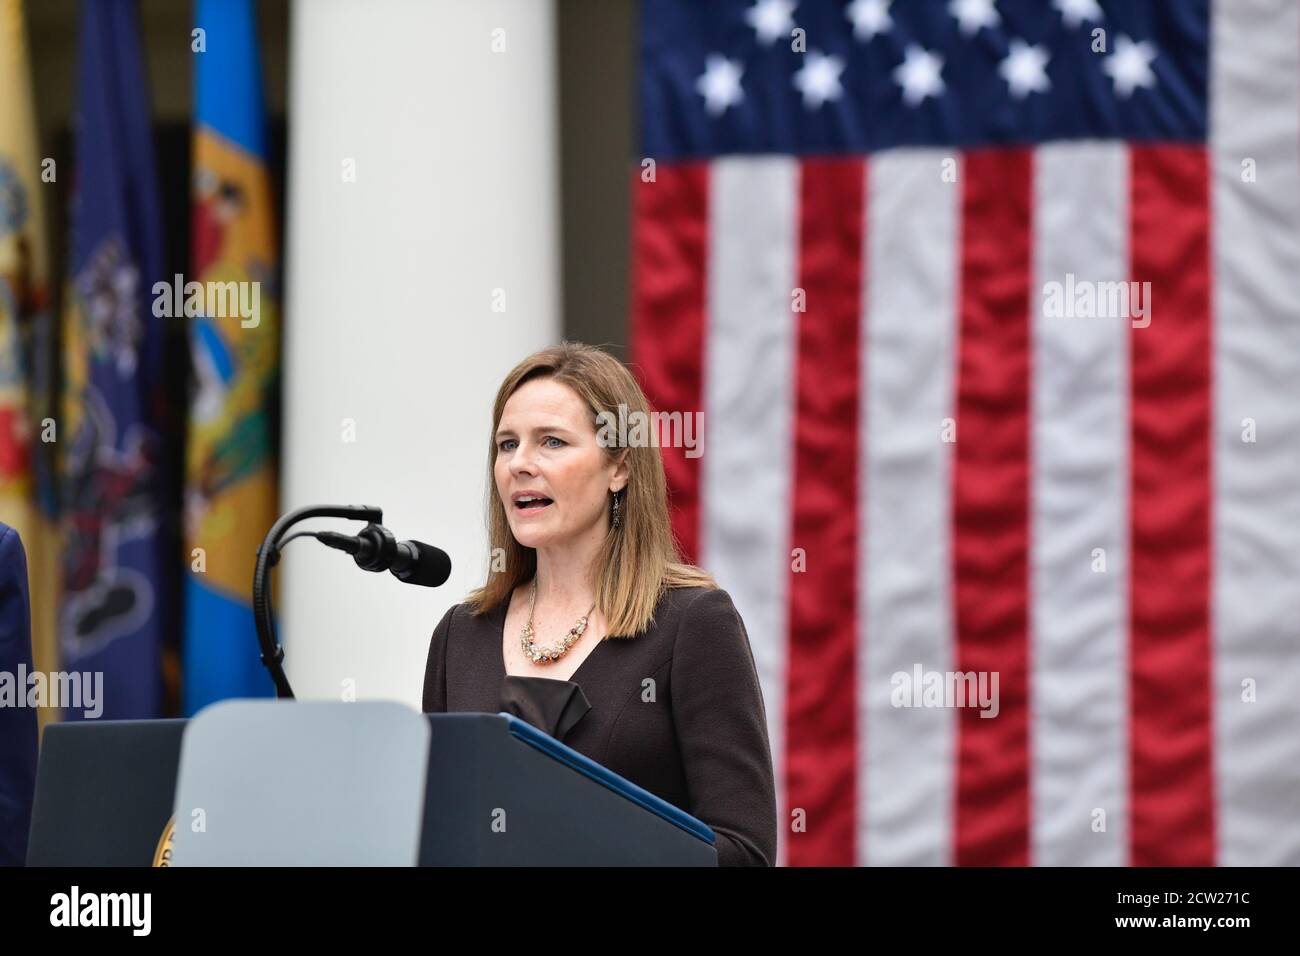 United States President Donald J. Trump nominates Amy Coney Barrett as Associate Justice of the US Supreme Court during a ceremony in the Rose Garden of the White House in Washington, DC on Saturday, September 26, 2020Credit: Rod Lamkey/CNP /MediaPunch Stock Photo